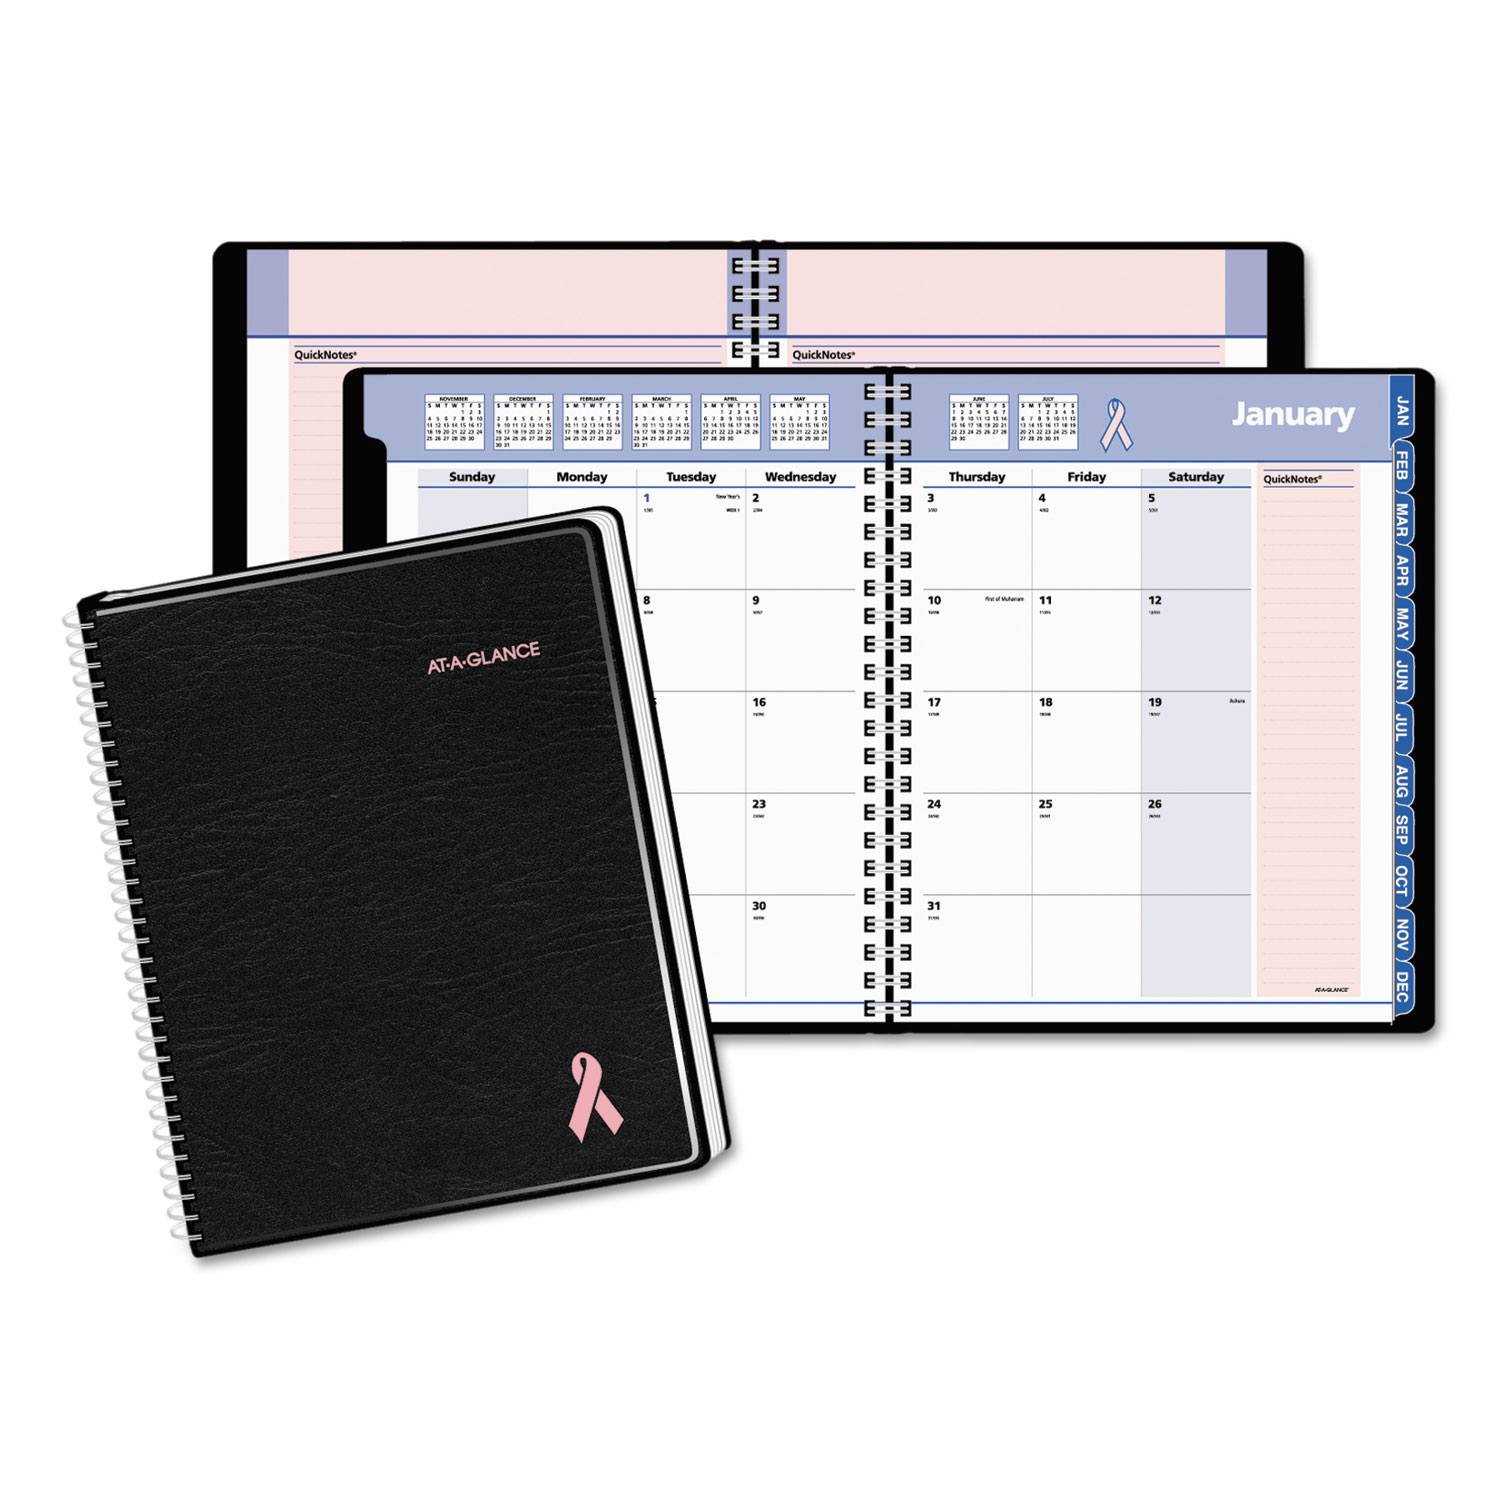  AT-A-GLANCE 76-PN08-05 QuickNotes Special Edition Monthly Planner, 8 3/4 x 6 7/8, Black/Pink, 2020 (AAG76PN0805) 